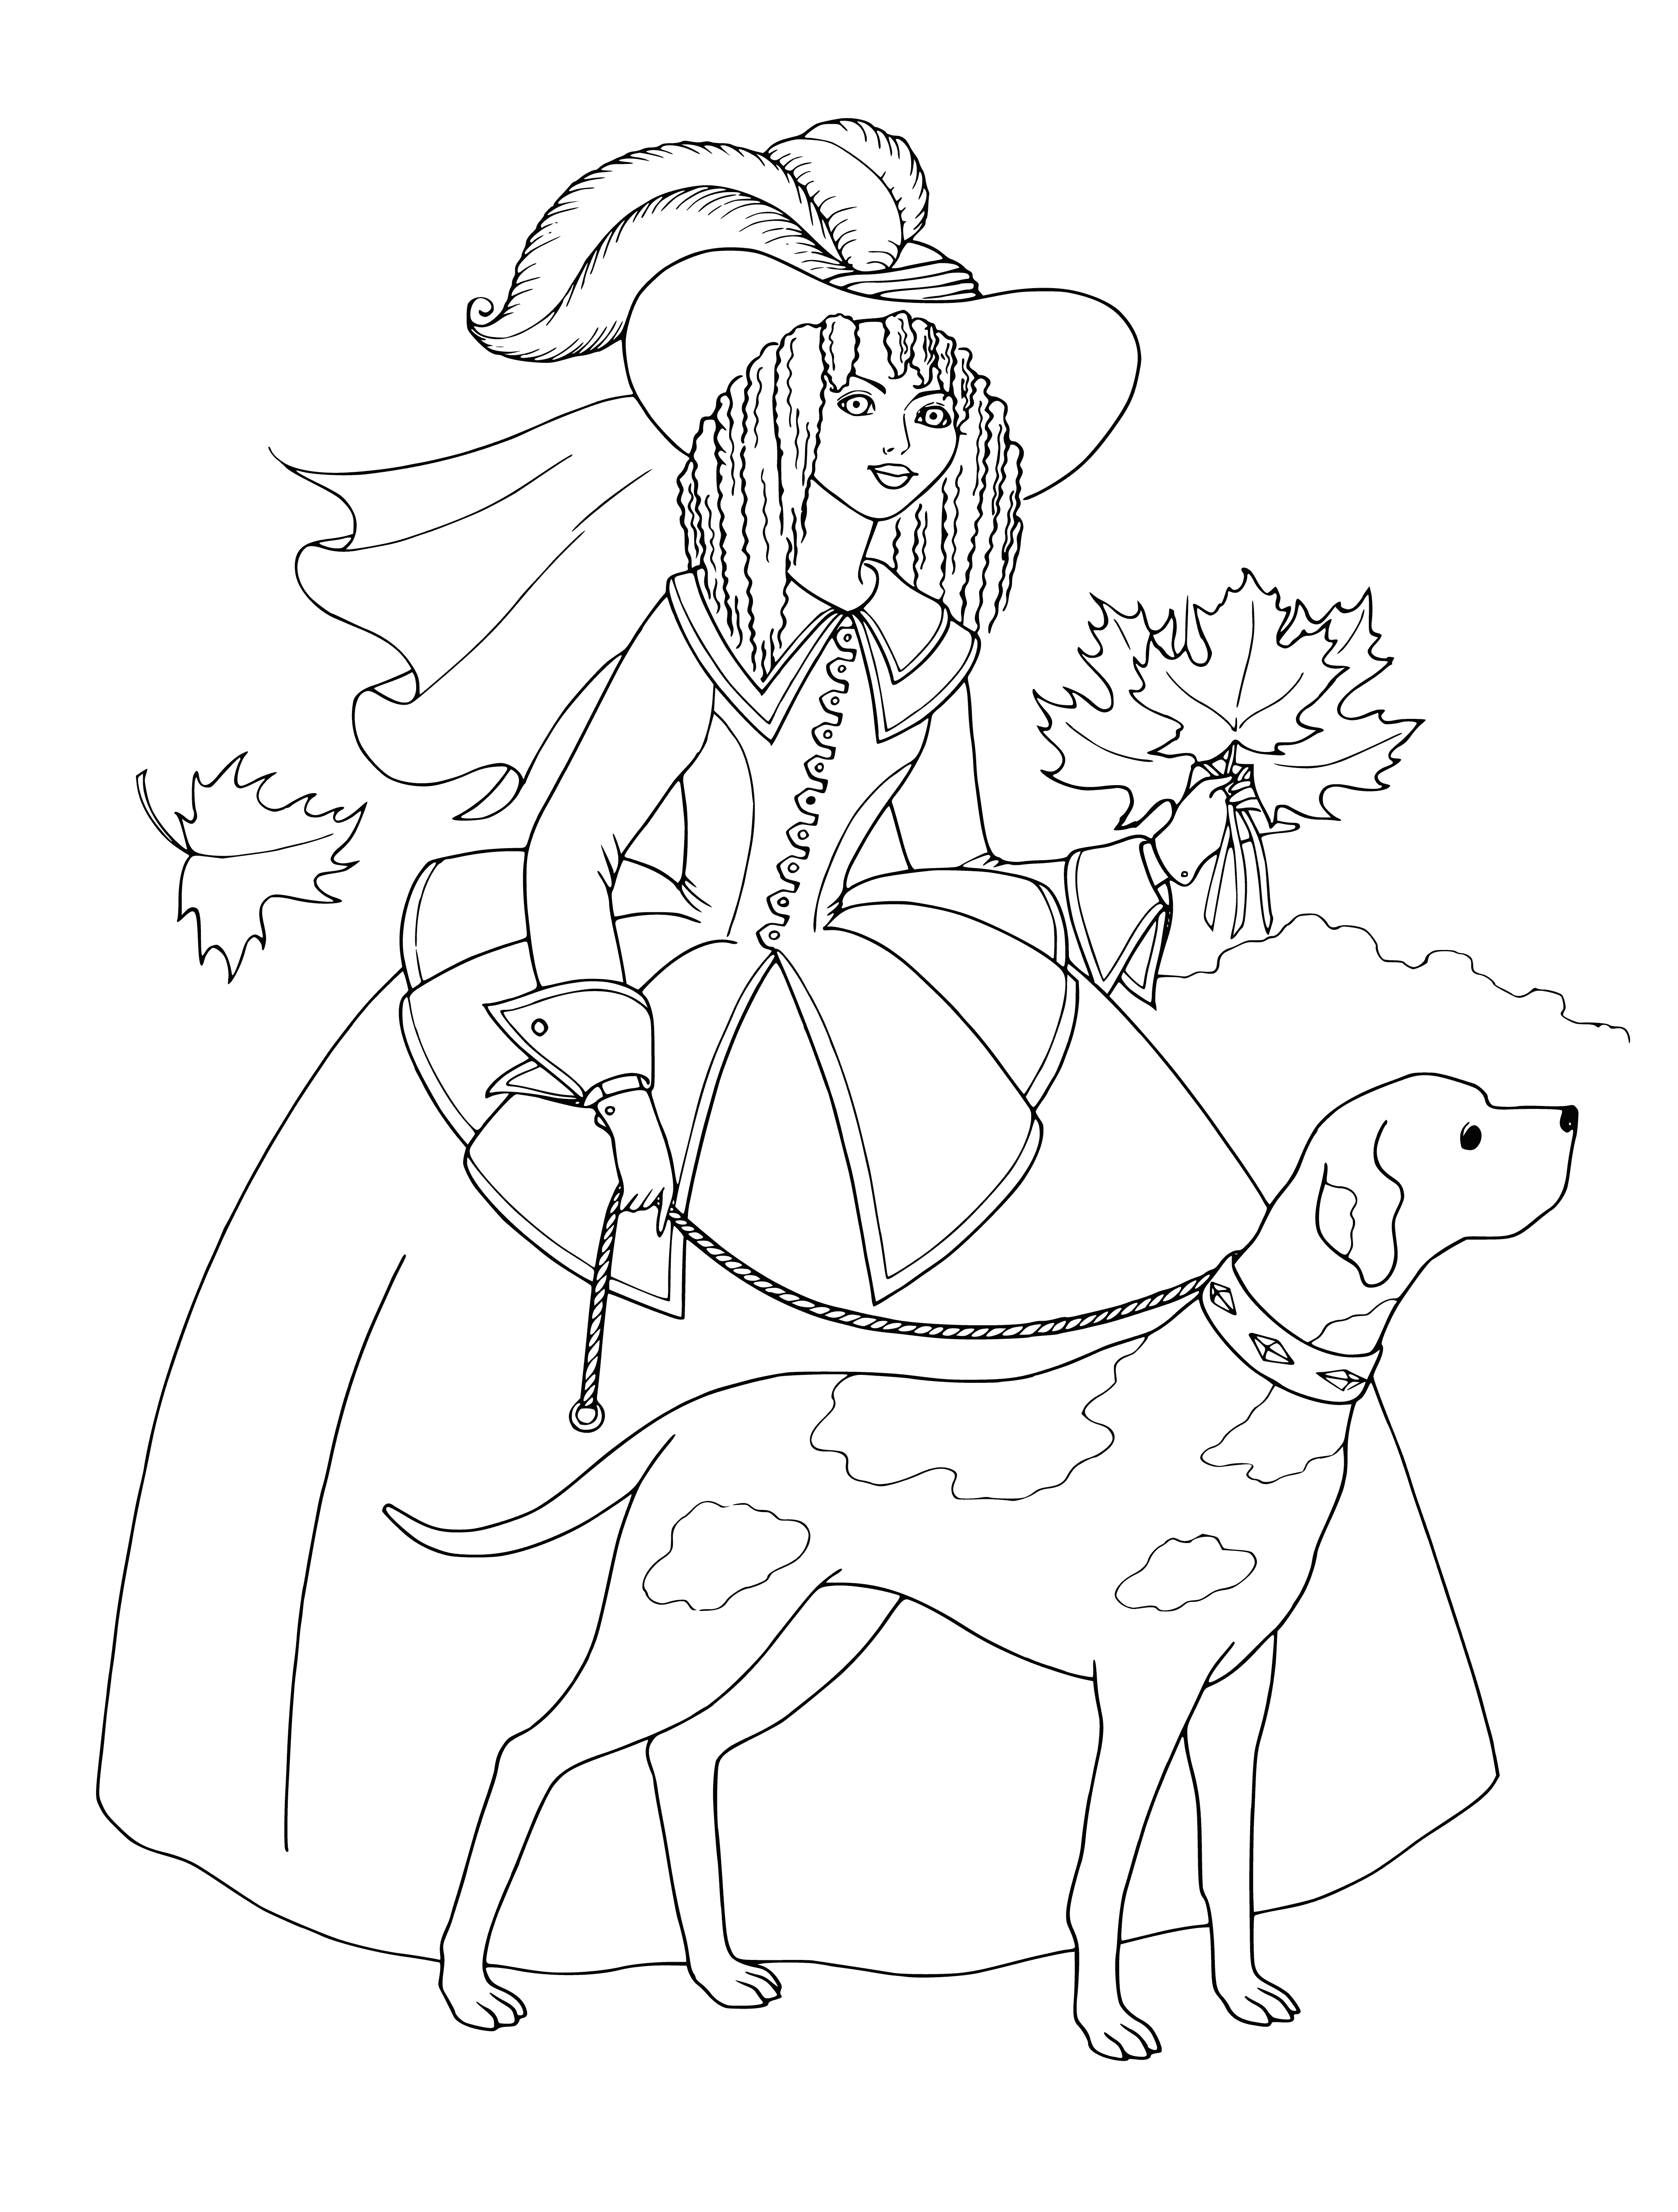 Princess for a walk coloring page